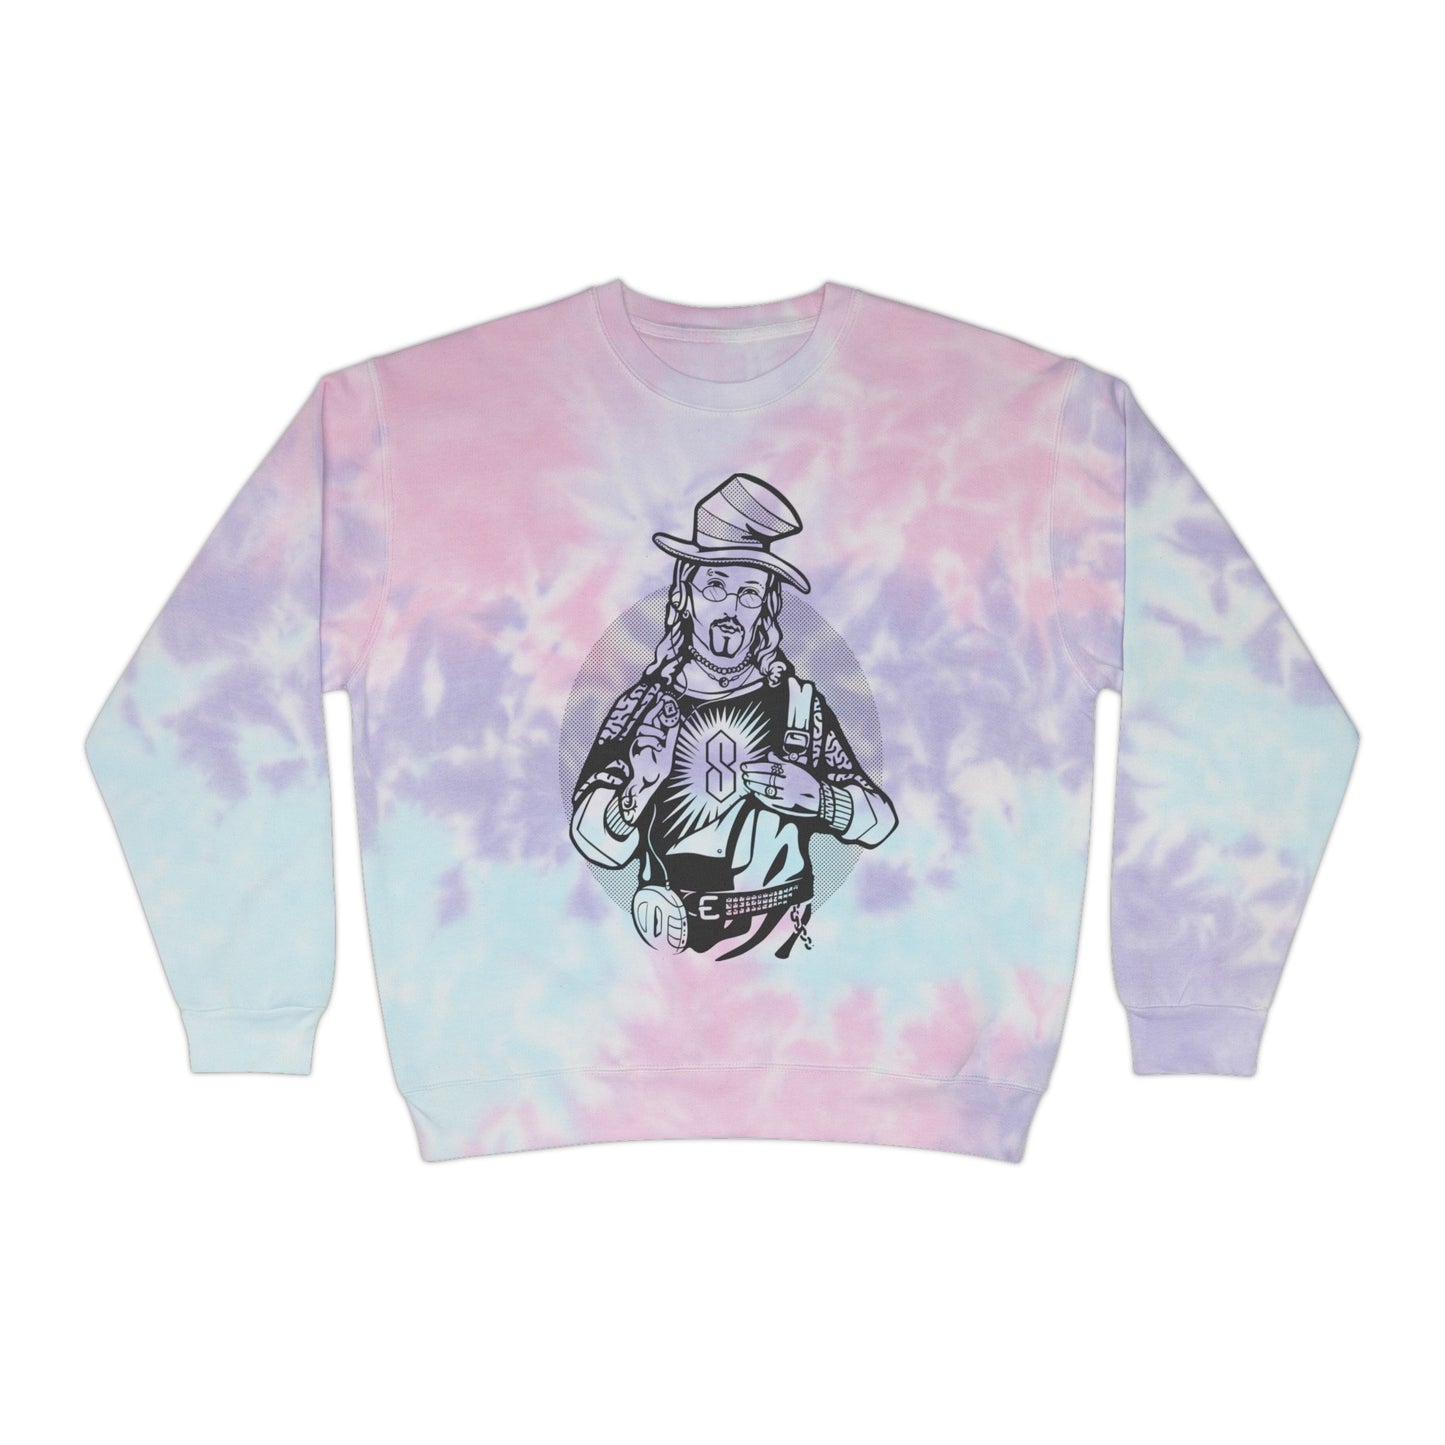 Jesus Is All That and a Bag of Chips tie-dye crewneck sweatshirt